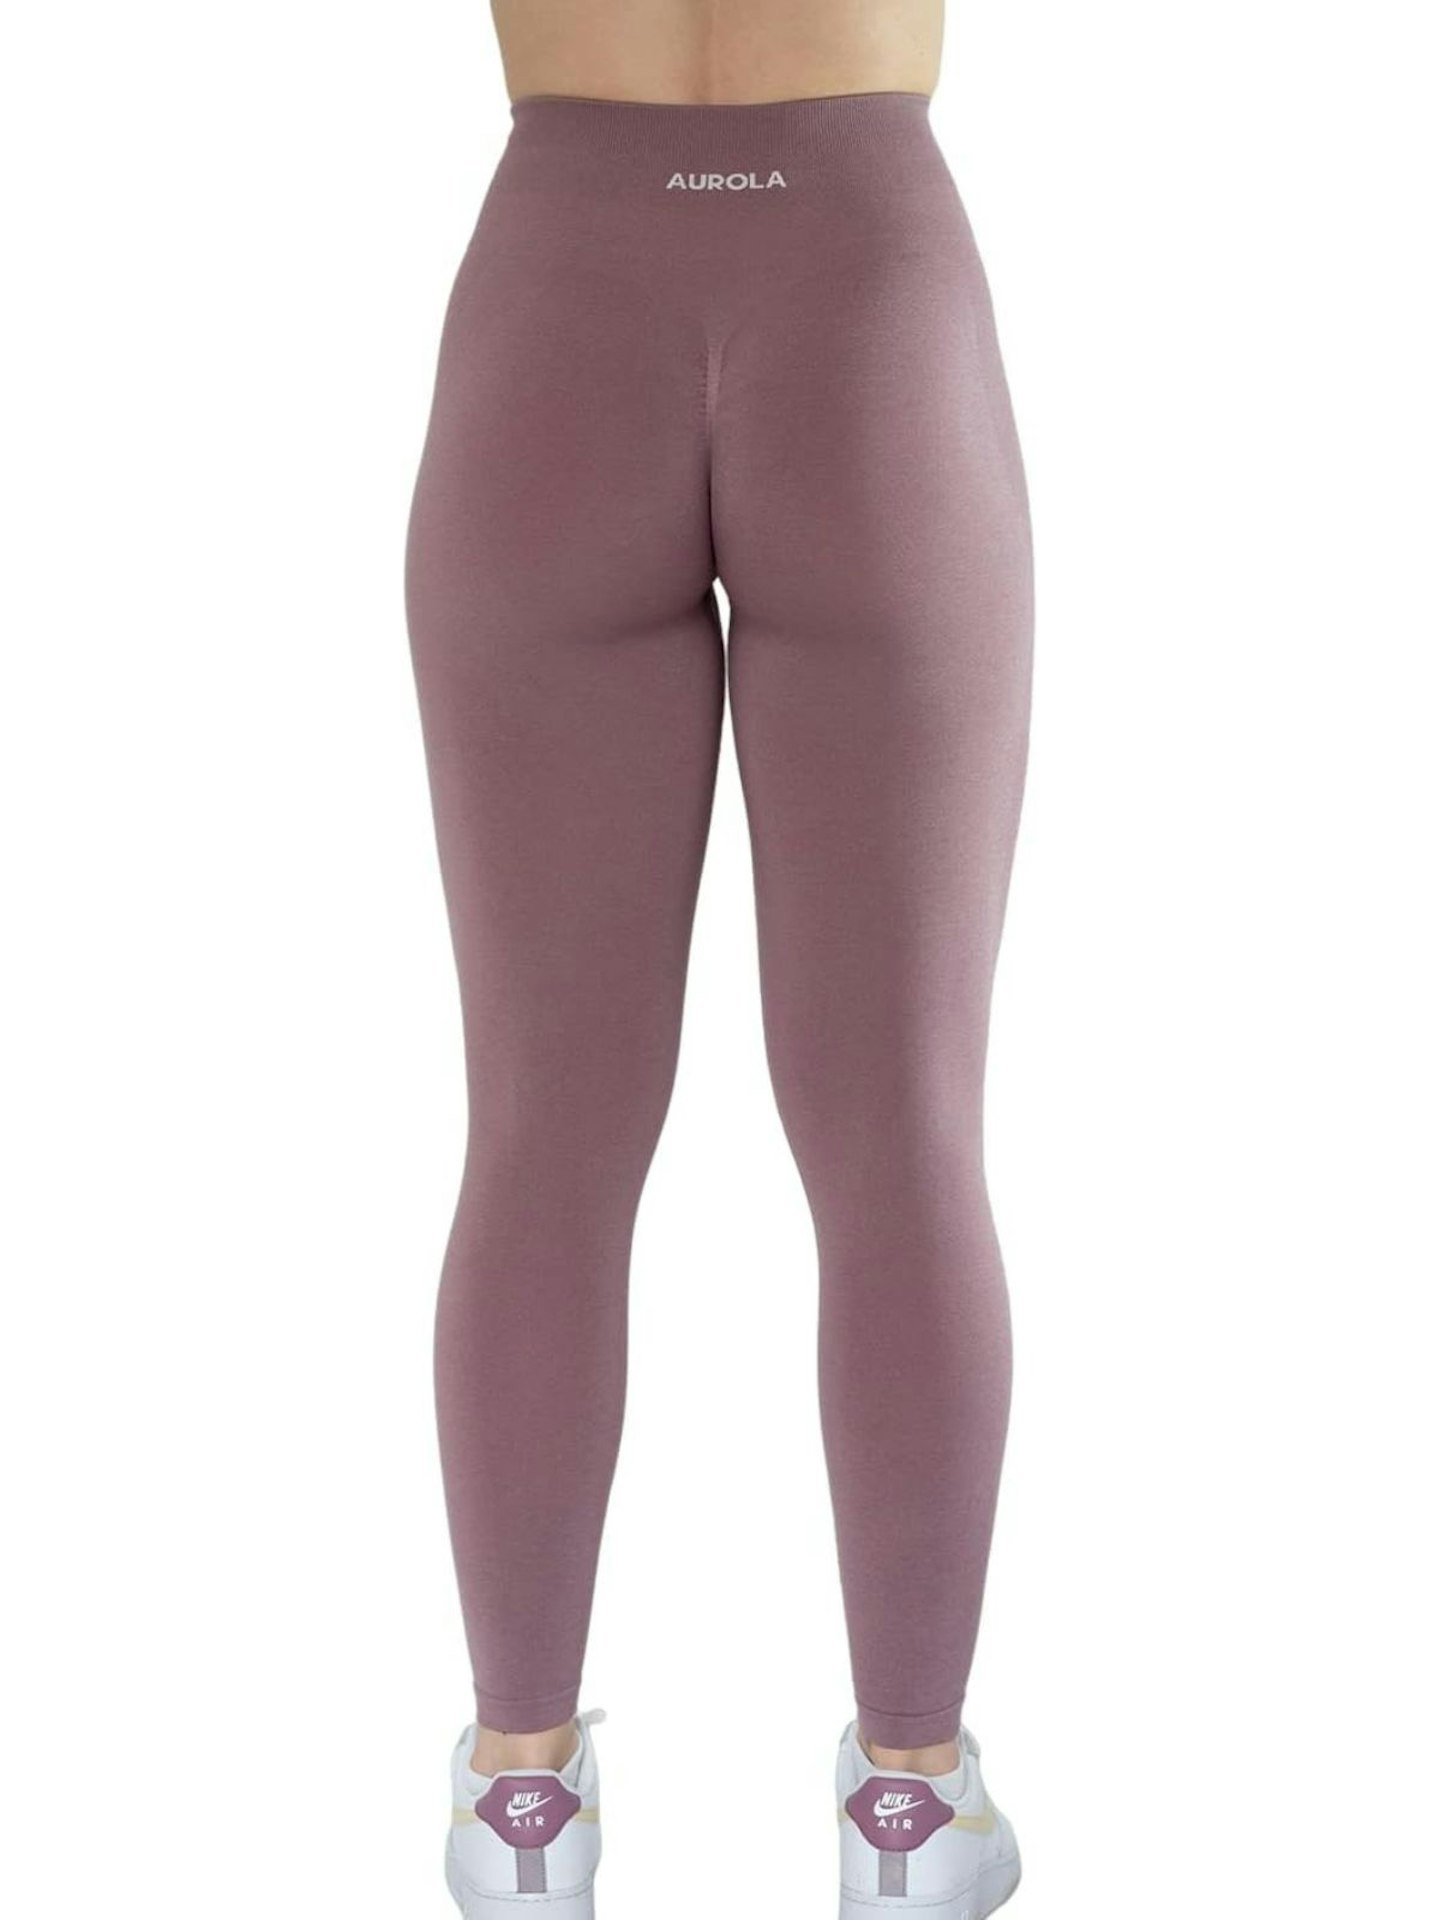 What Are The Best Scrunch Bum Leggings  International Society of Precision  Agriculture